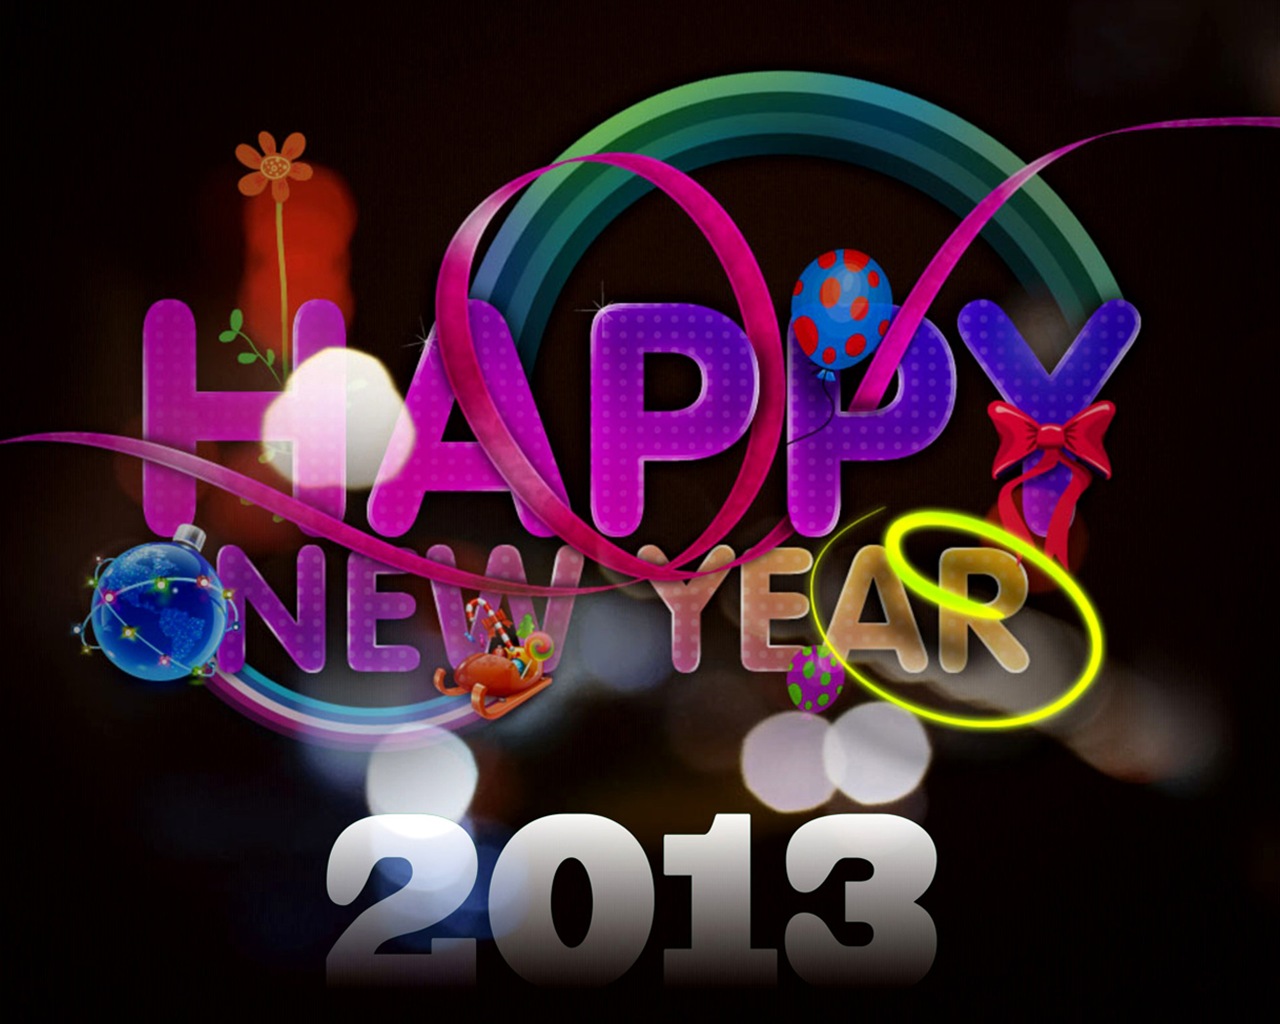 2013 Happy New Year HD wallpapers #15 - 1280x1024